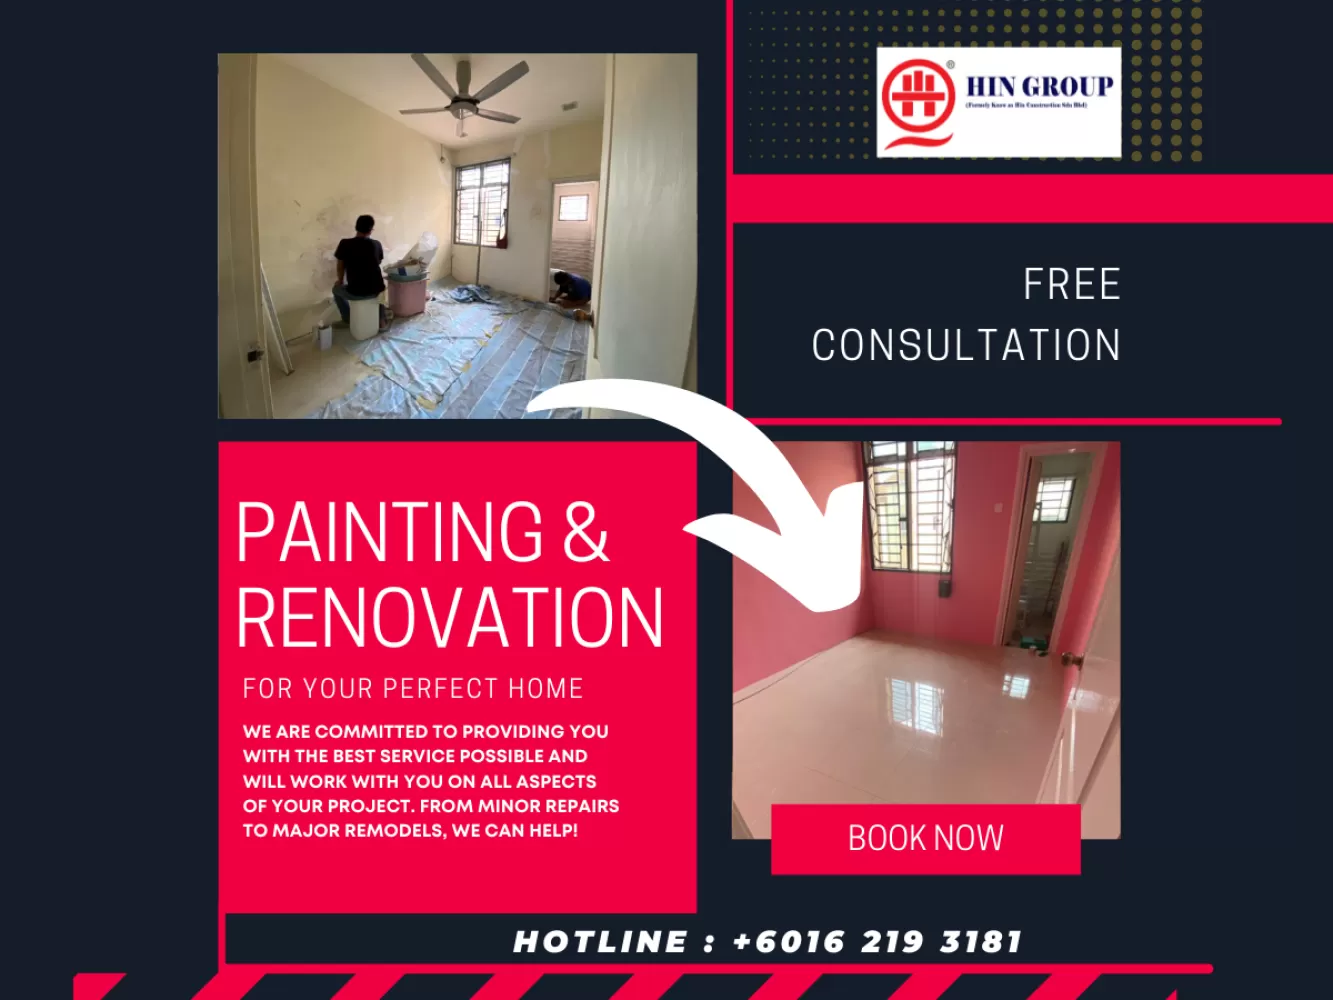 Semenyih: What to Look for in a Renovation Contractor Near Me Now